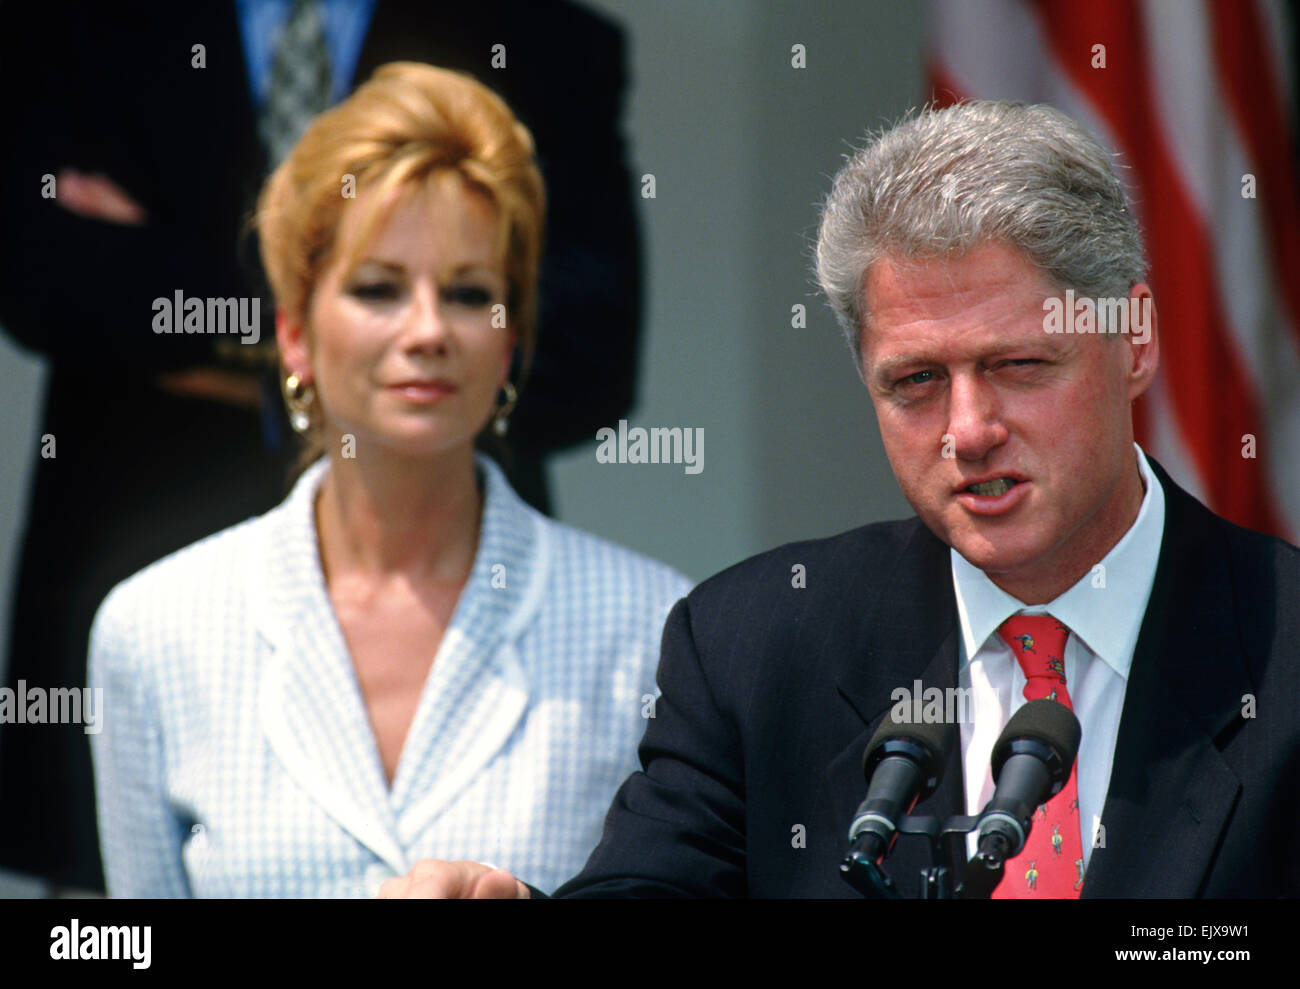 US President Bill Clinton discusses worker rights in the clothing industry with celebrity Kathy Lee Gifford in the Rose Garden at the White House August 2, 1997 in Washington, DC. Stock Photo